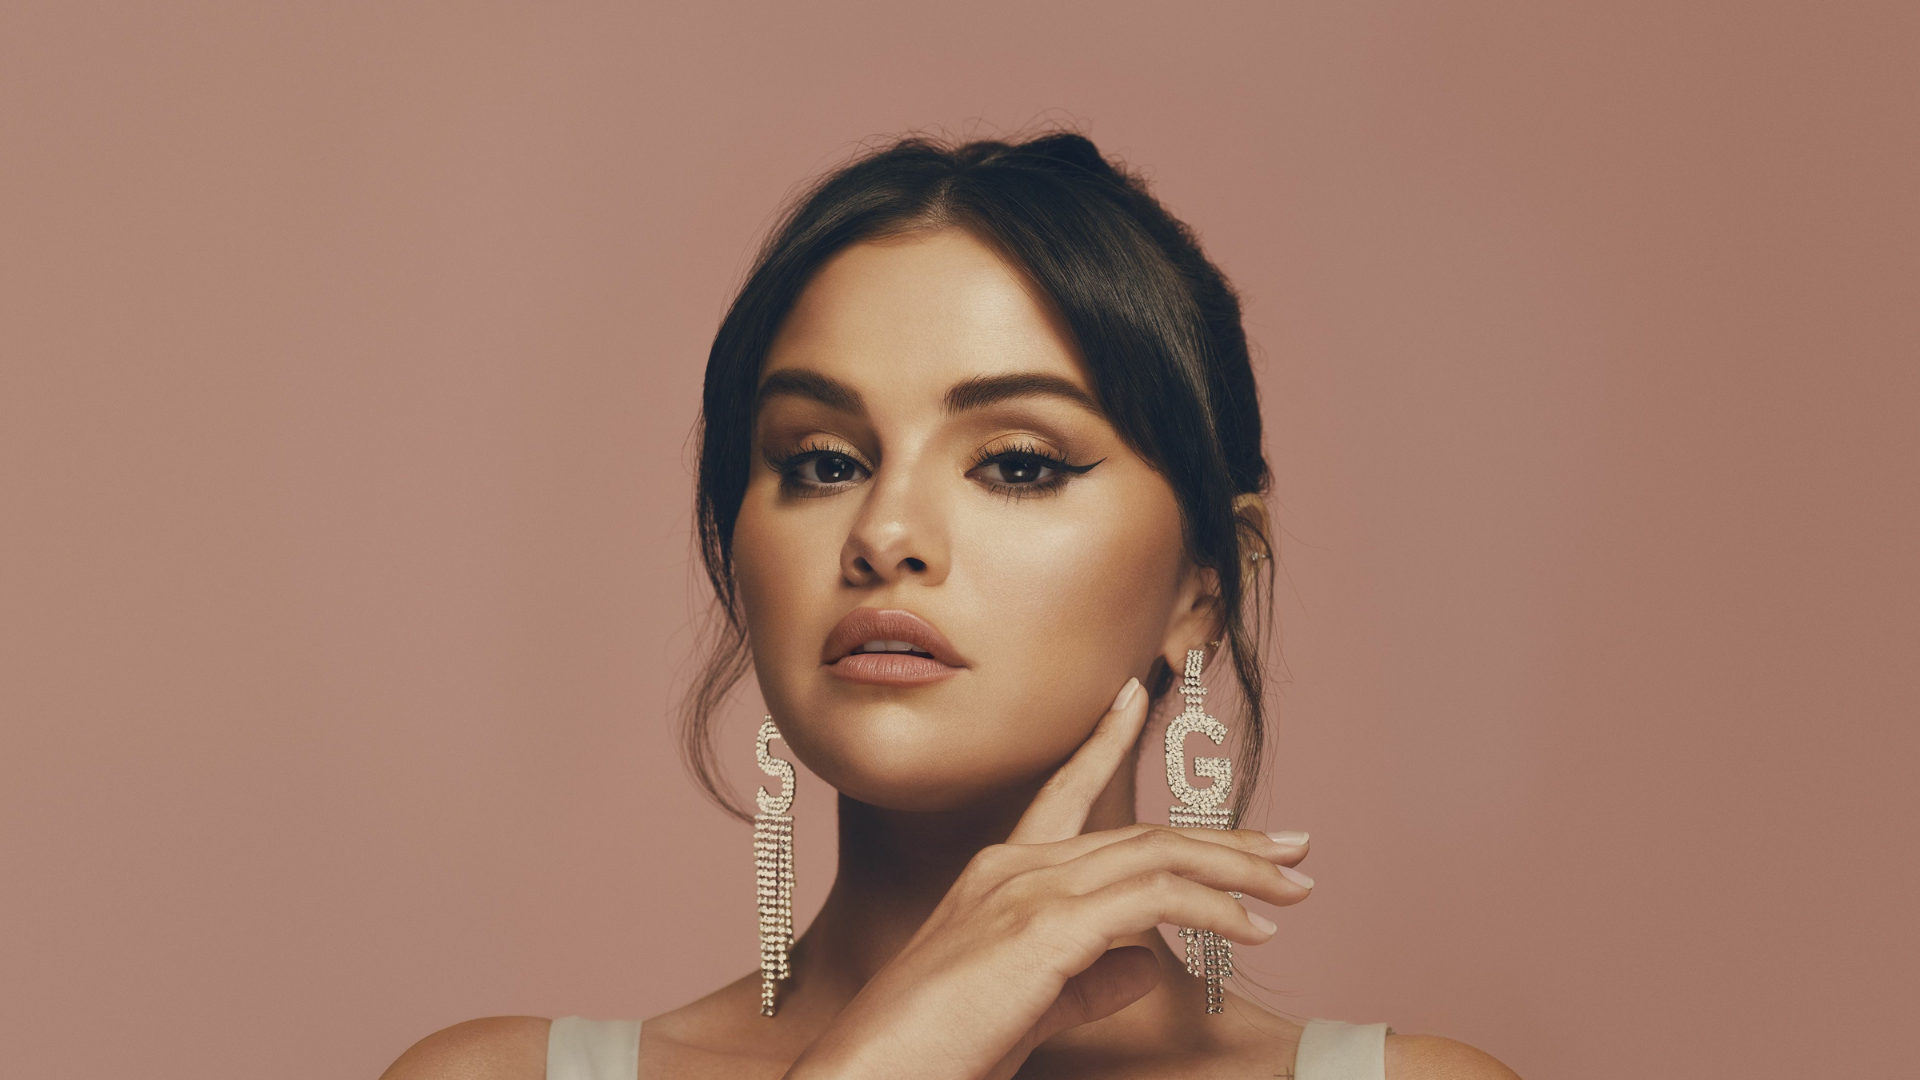 Selena Gomez Clarifies "Single Soon" Song Isn't About The Weeknd